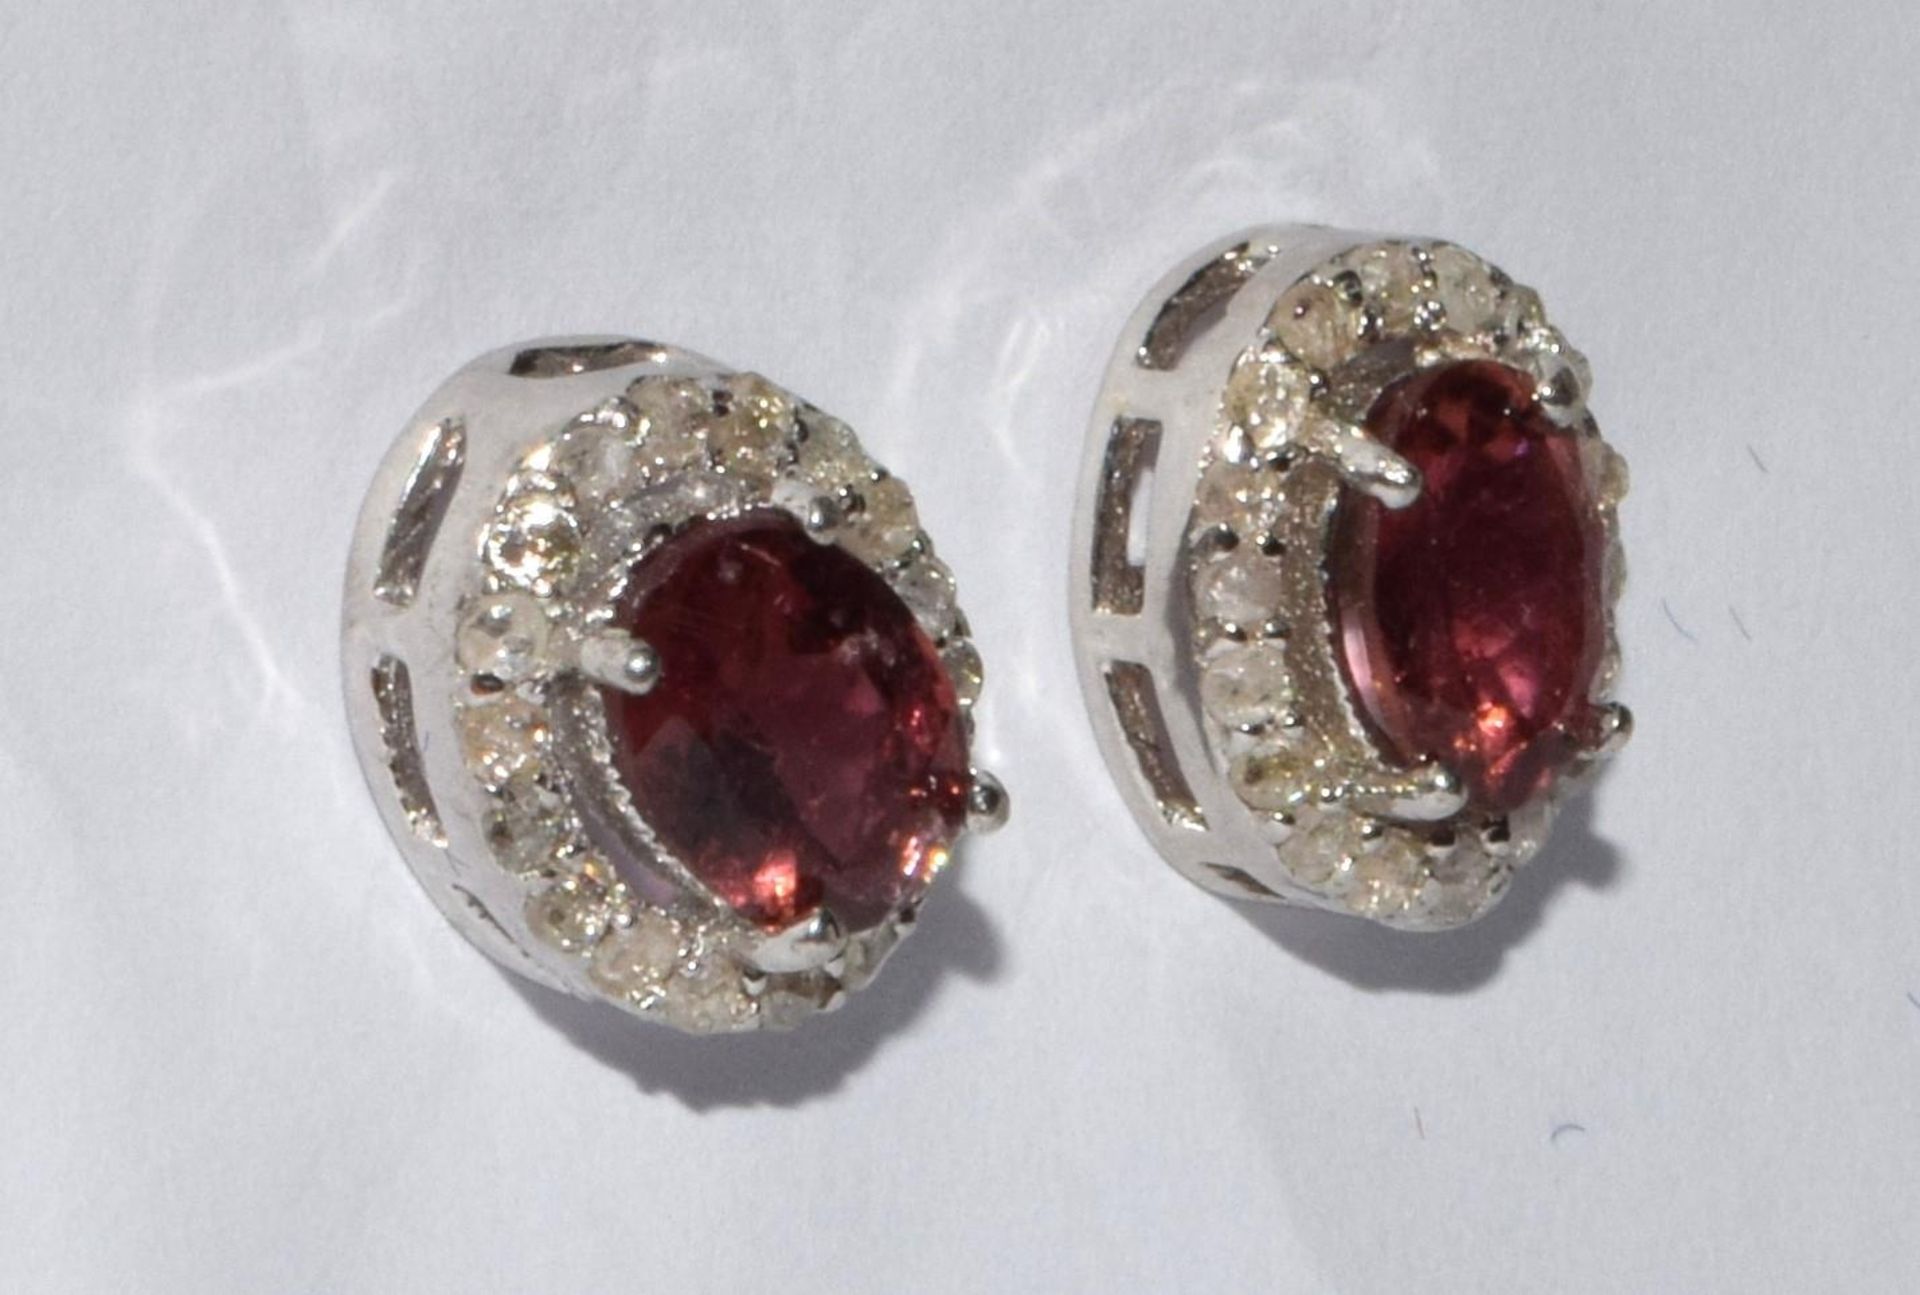 Diamond and pink tourmaline stud earrings with 18ct gold posts - Image 6 of 6